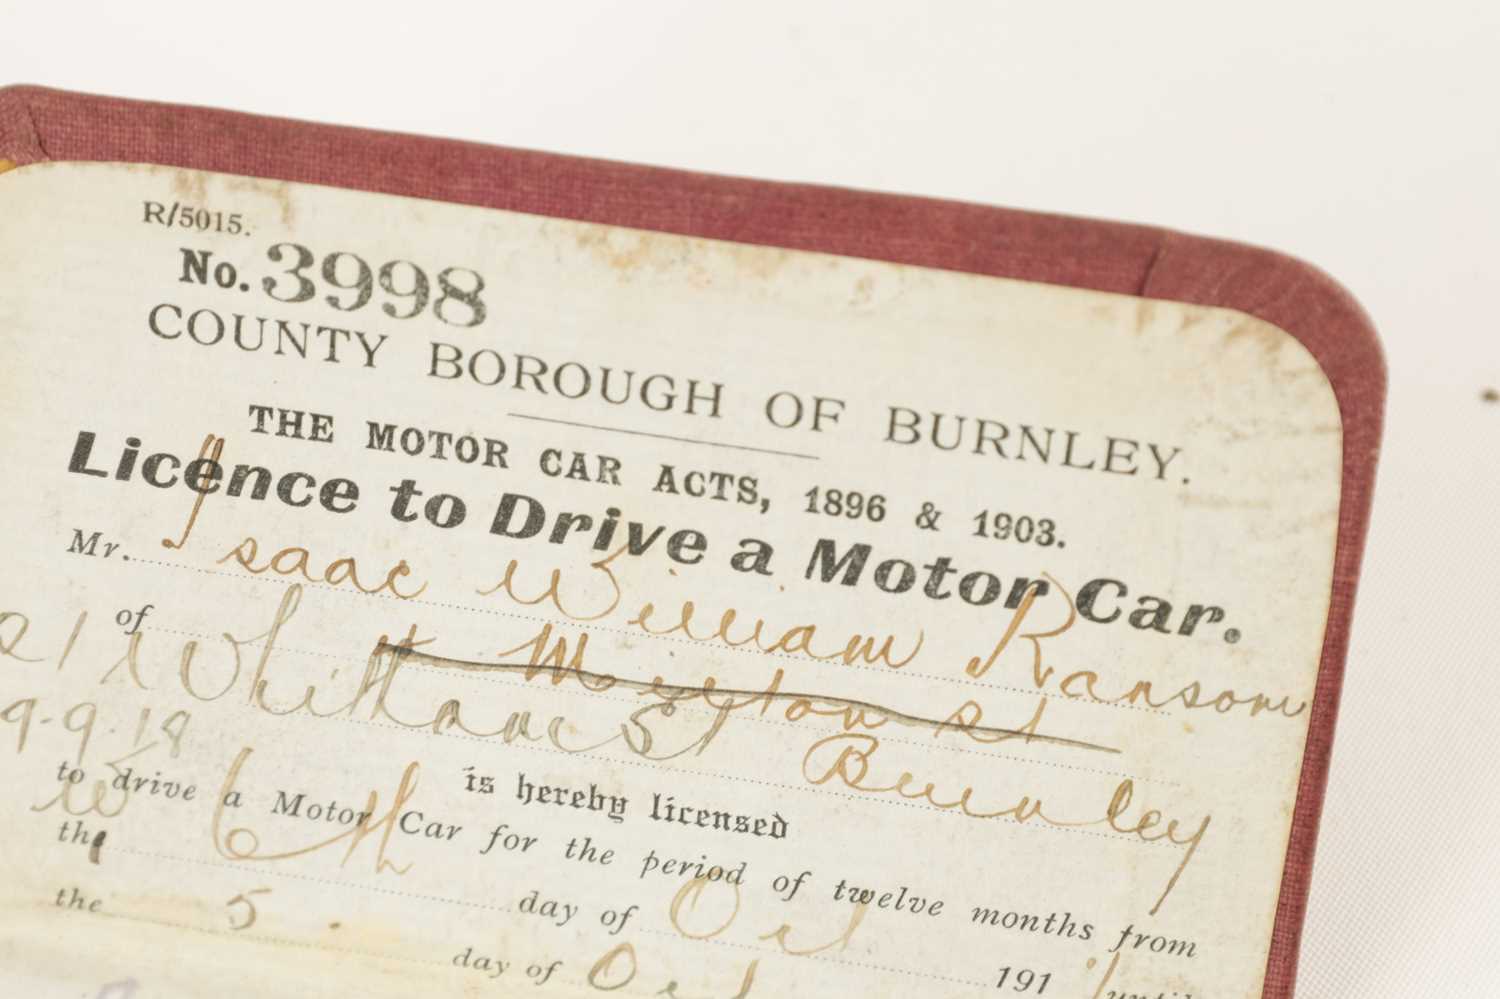 AN ORIGINAL 1909 COUNTY BOROUGH OF BURNLEY DRIVING LICENSE - Image 4 of 5